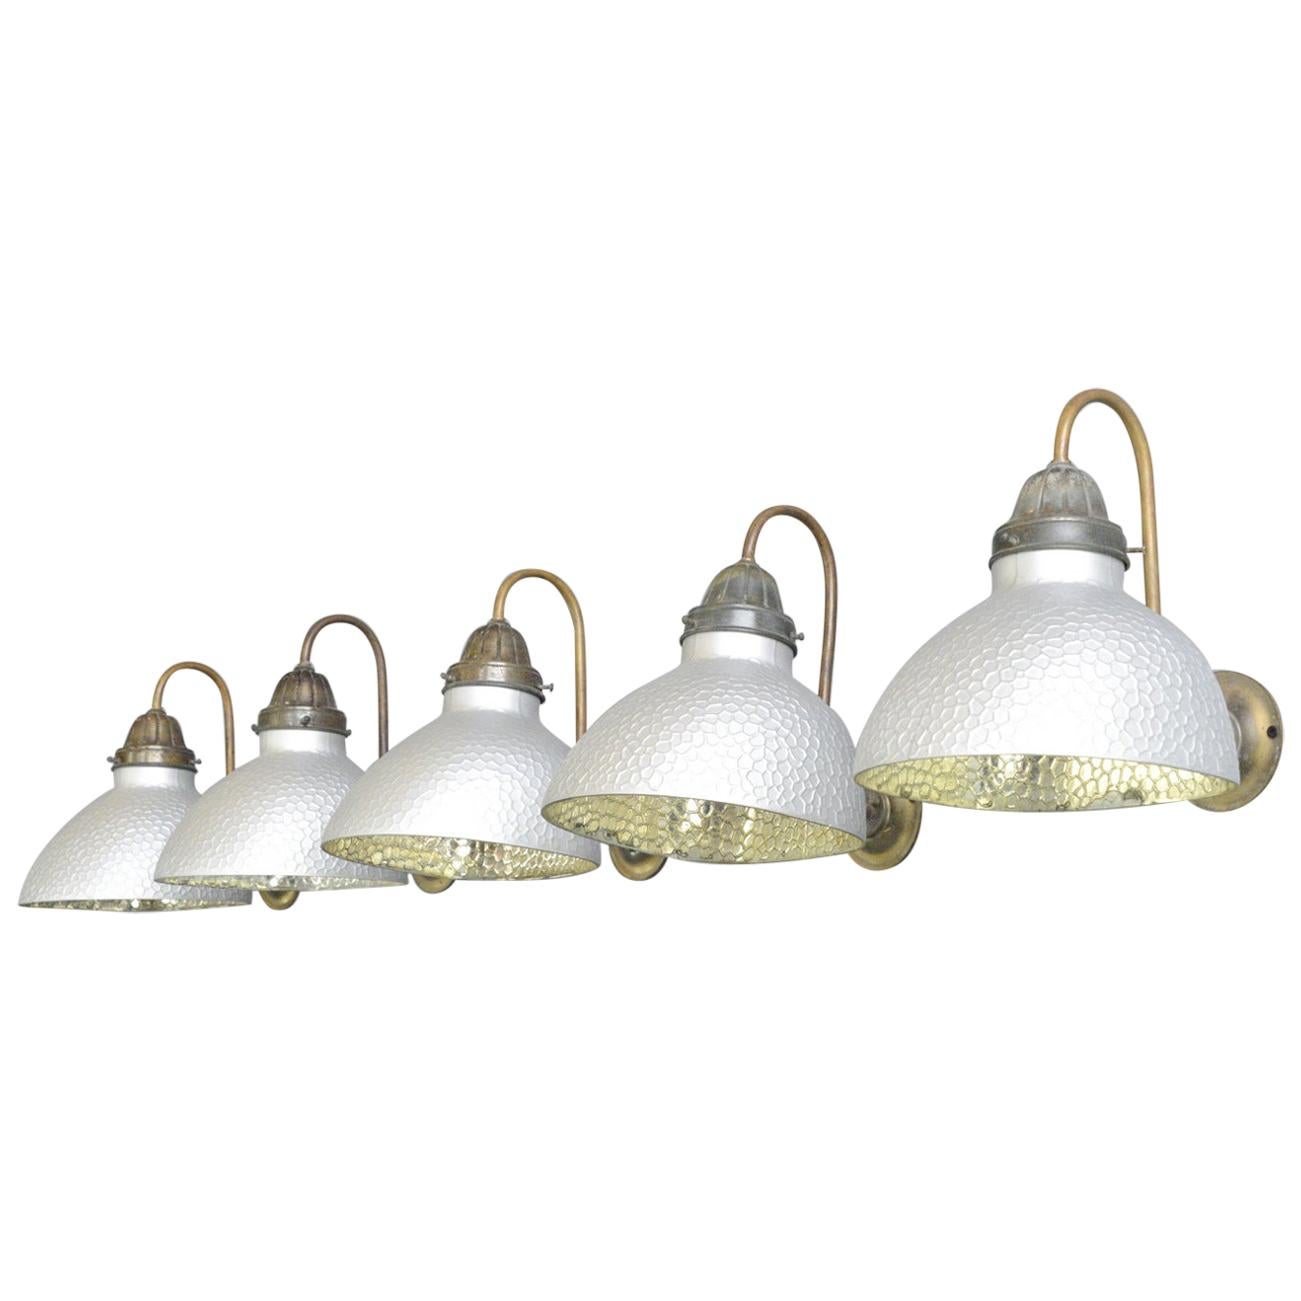 Wall Mounted Mercury Glass Lights by Philips, circa 1930s